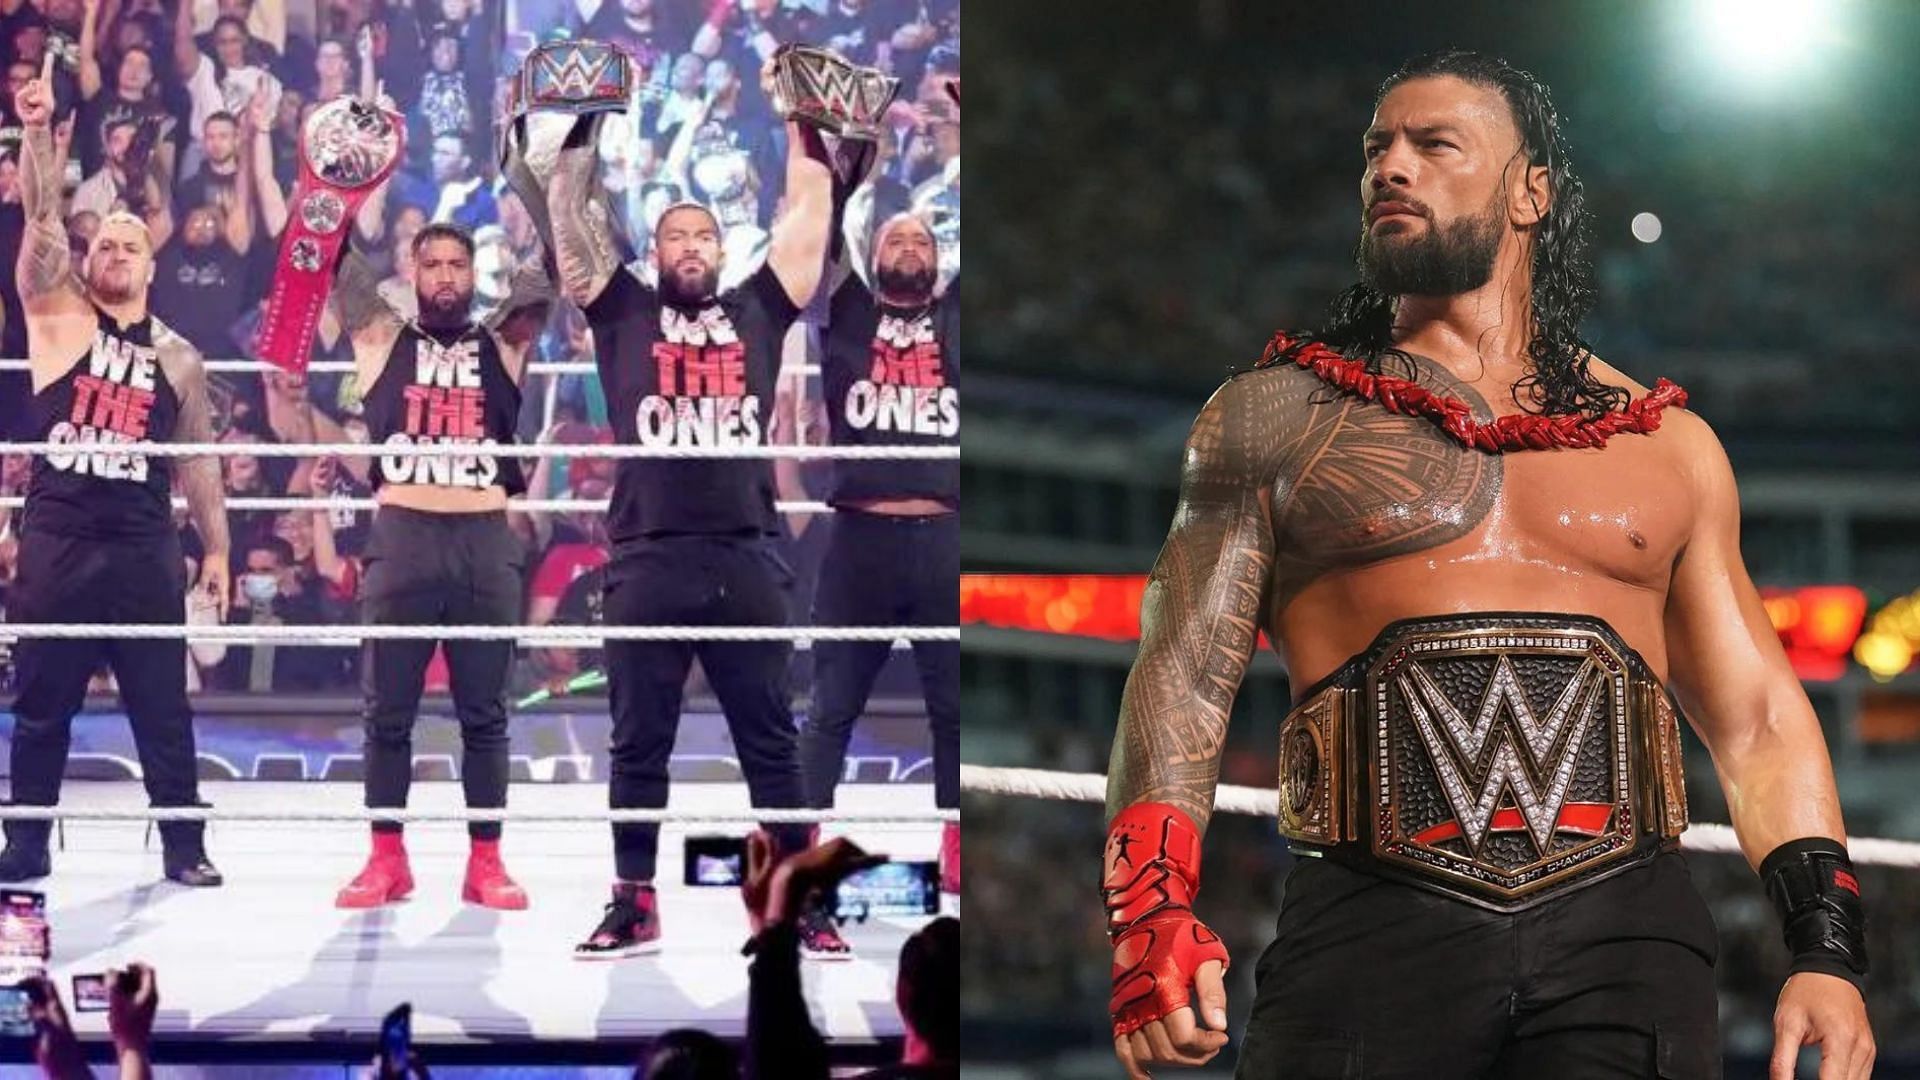 Roman Reigns is the current leader of The Bloodline